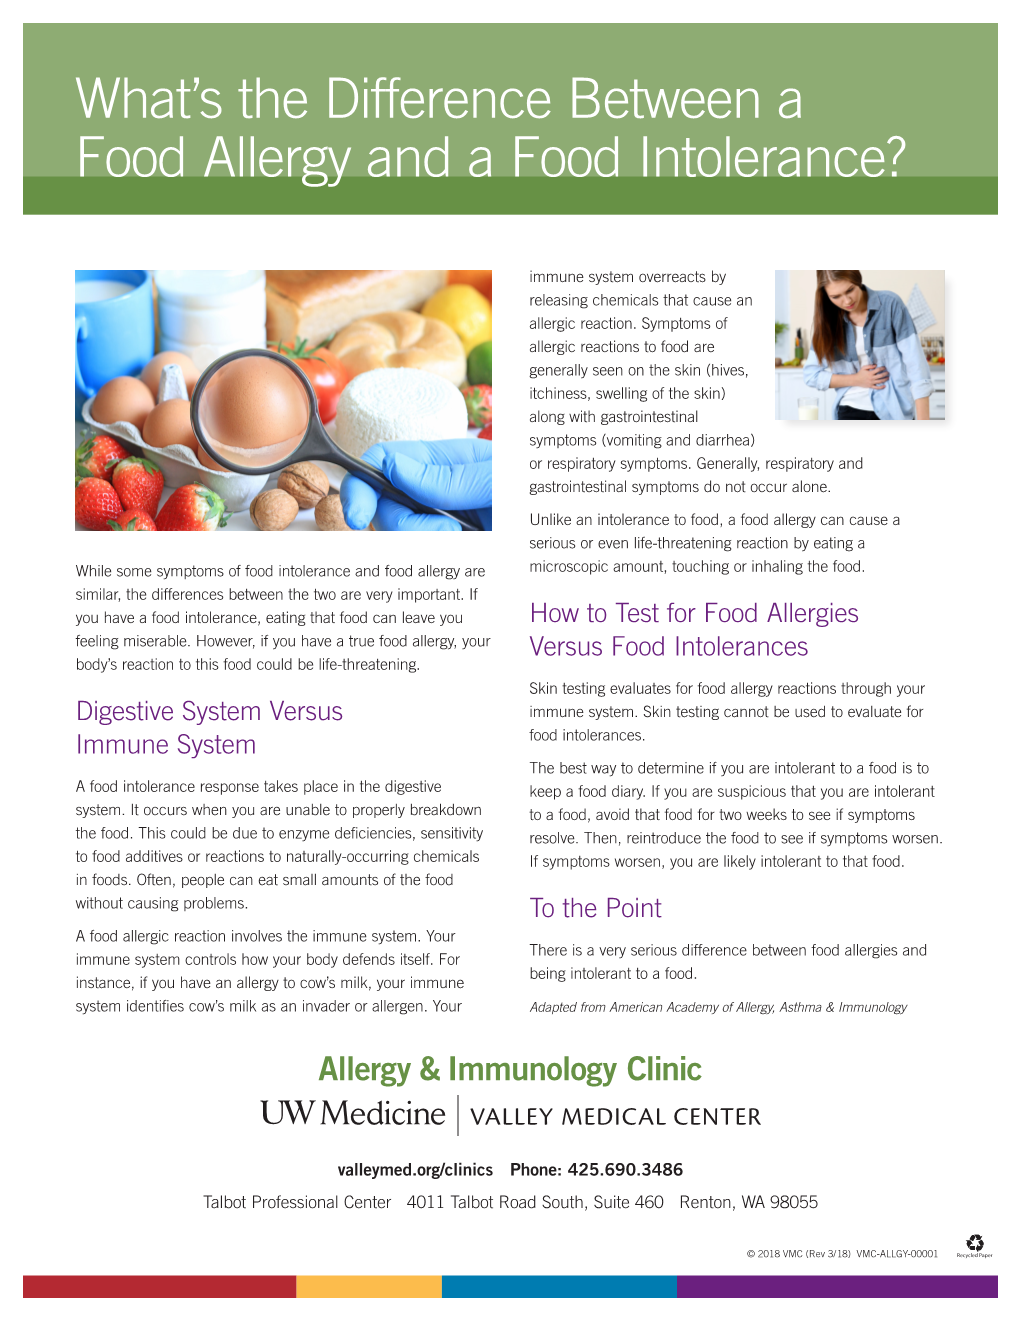 What's the Difference Between a Food Allergy and a Food Intolerance?